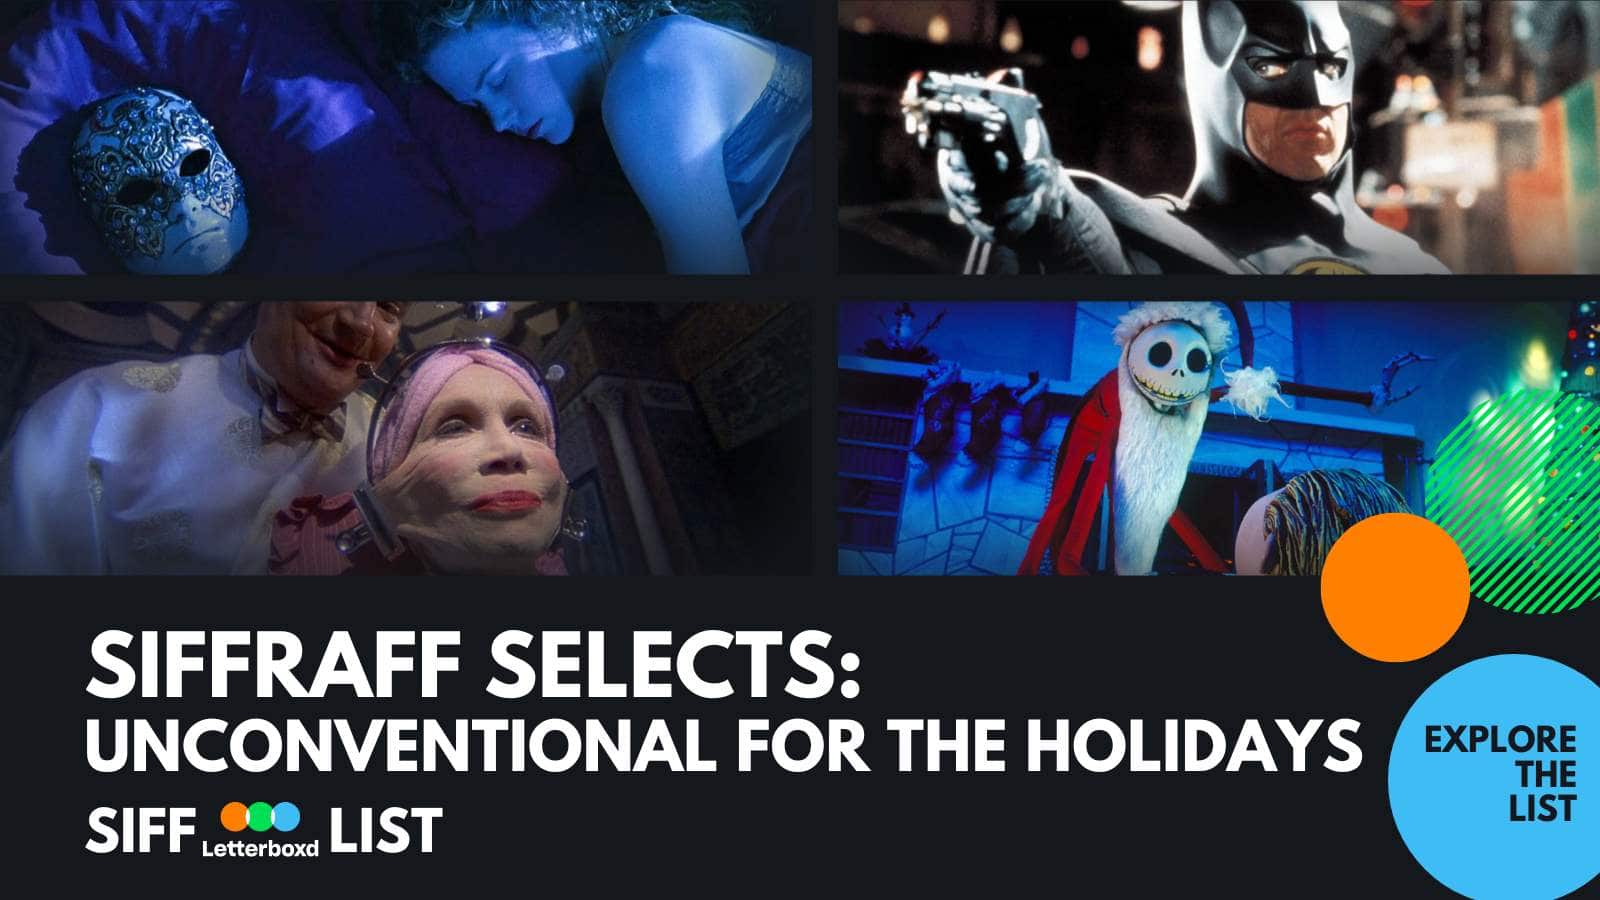 SIFFRAFF Selects: Unconventional for the Holidays